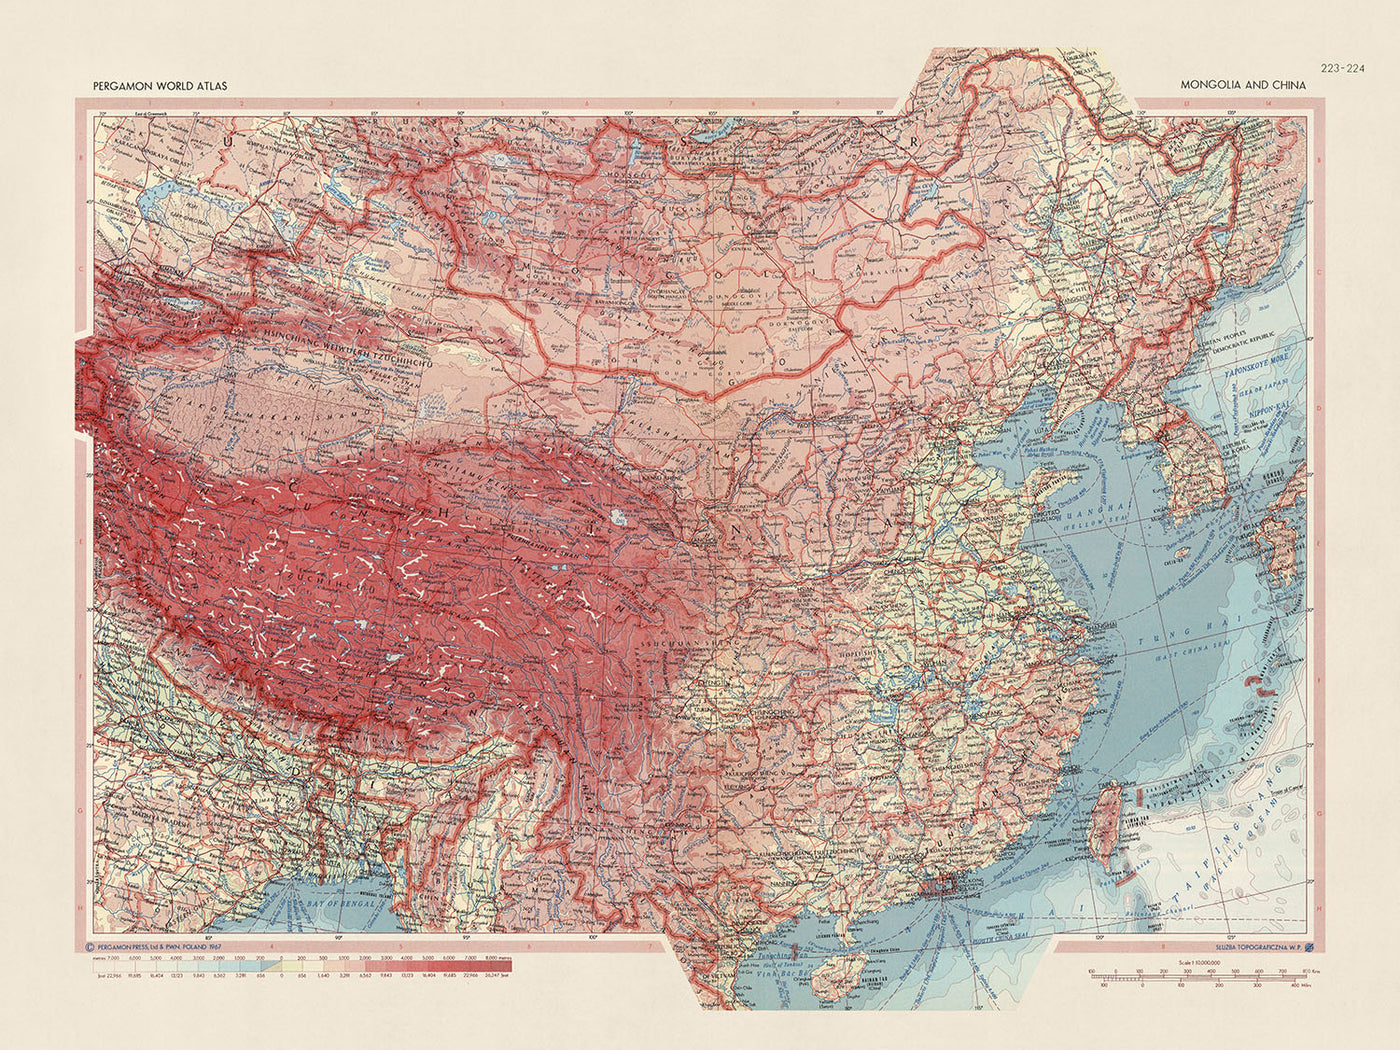 Old Map of Mongolia and China, 1967: Korea, Taiwan, Detailed Political and Physical Atlas